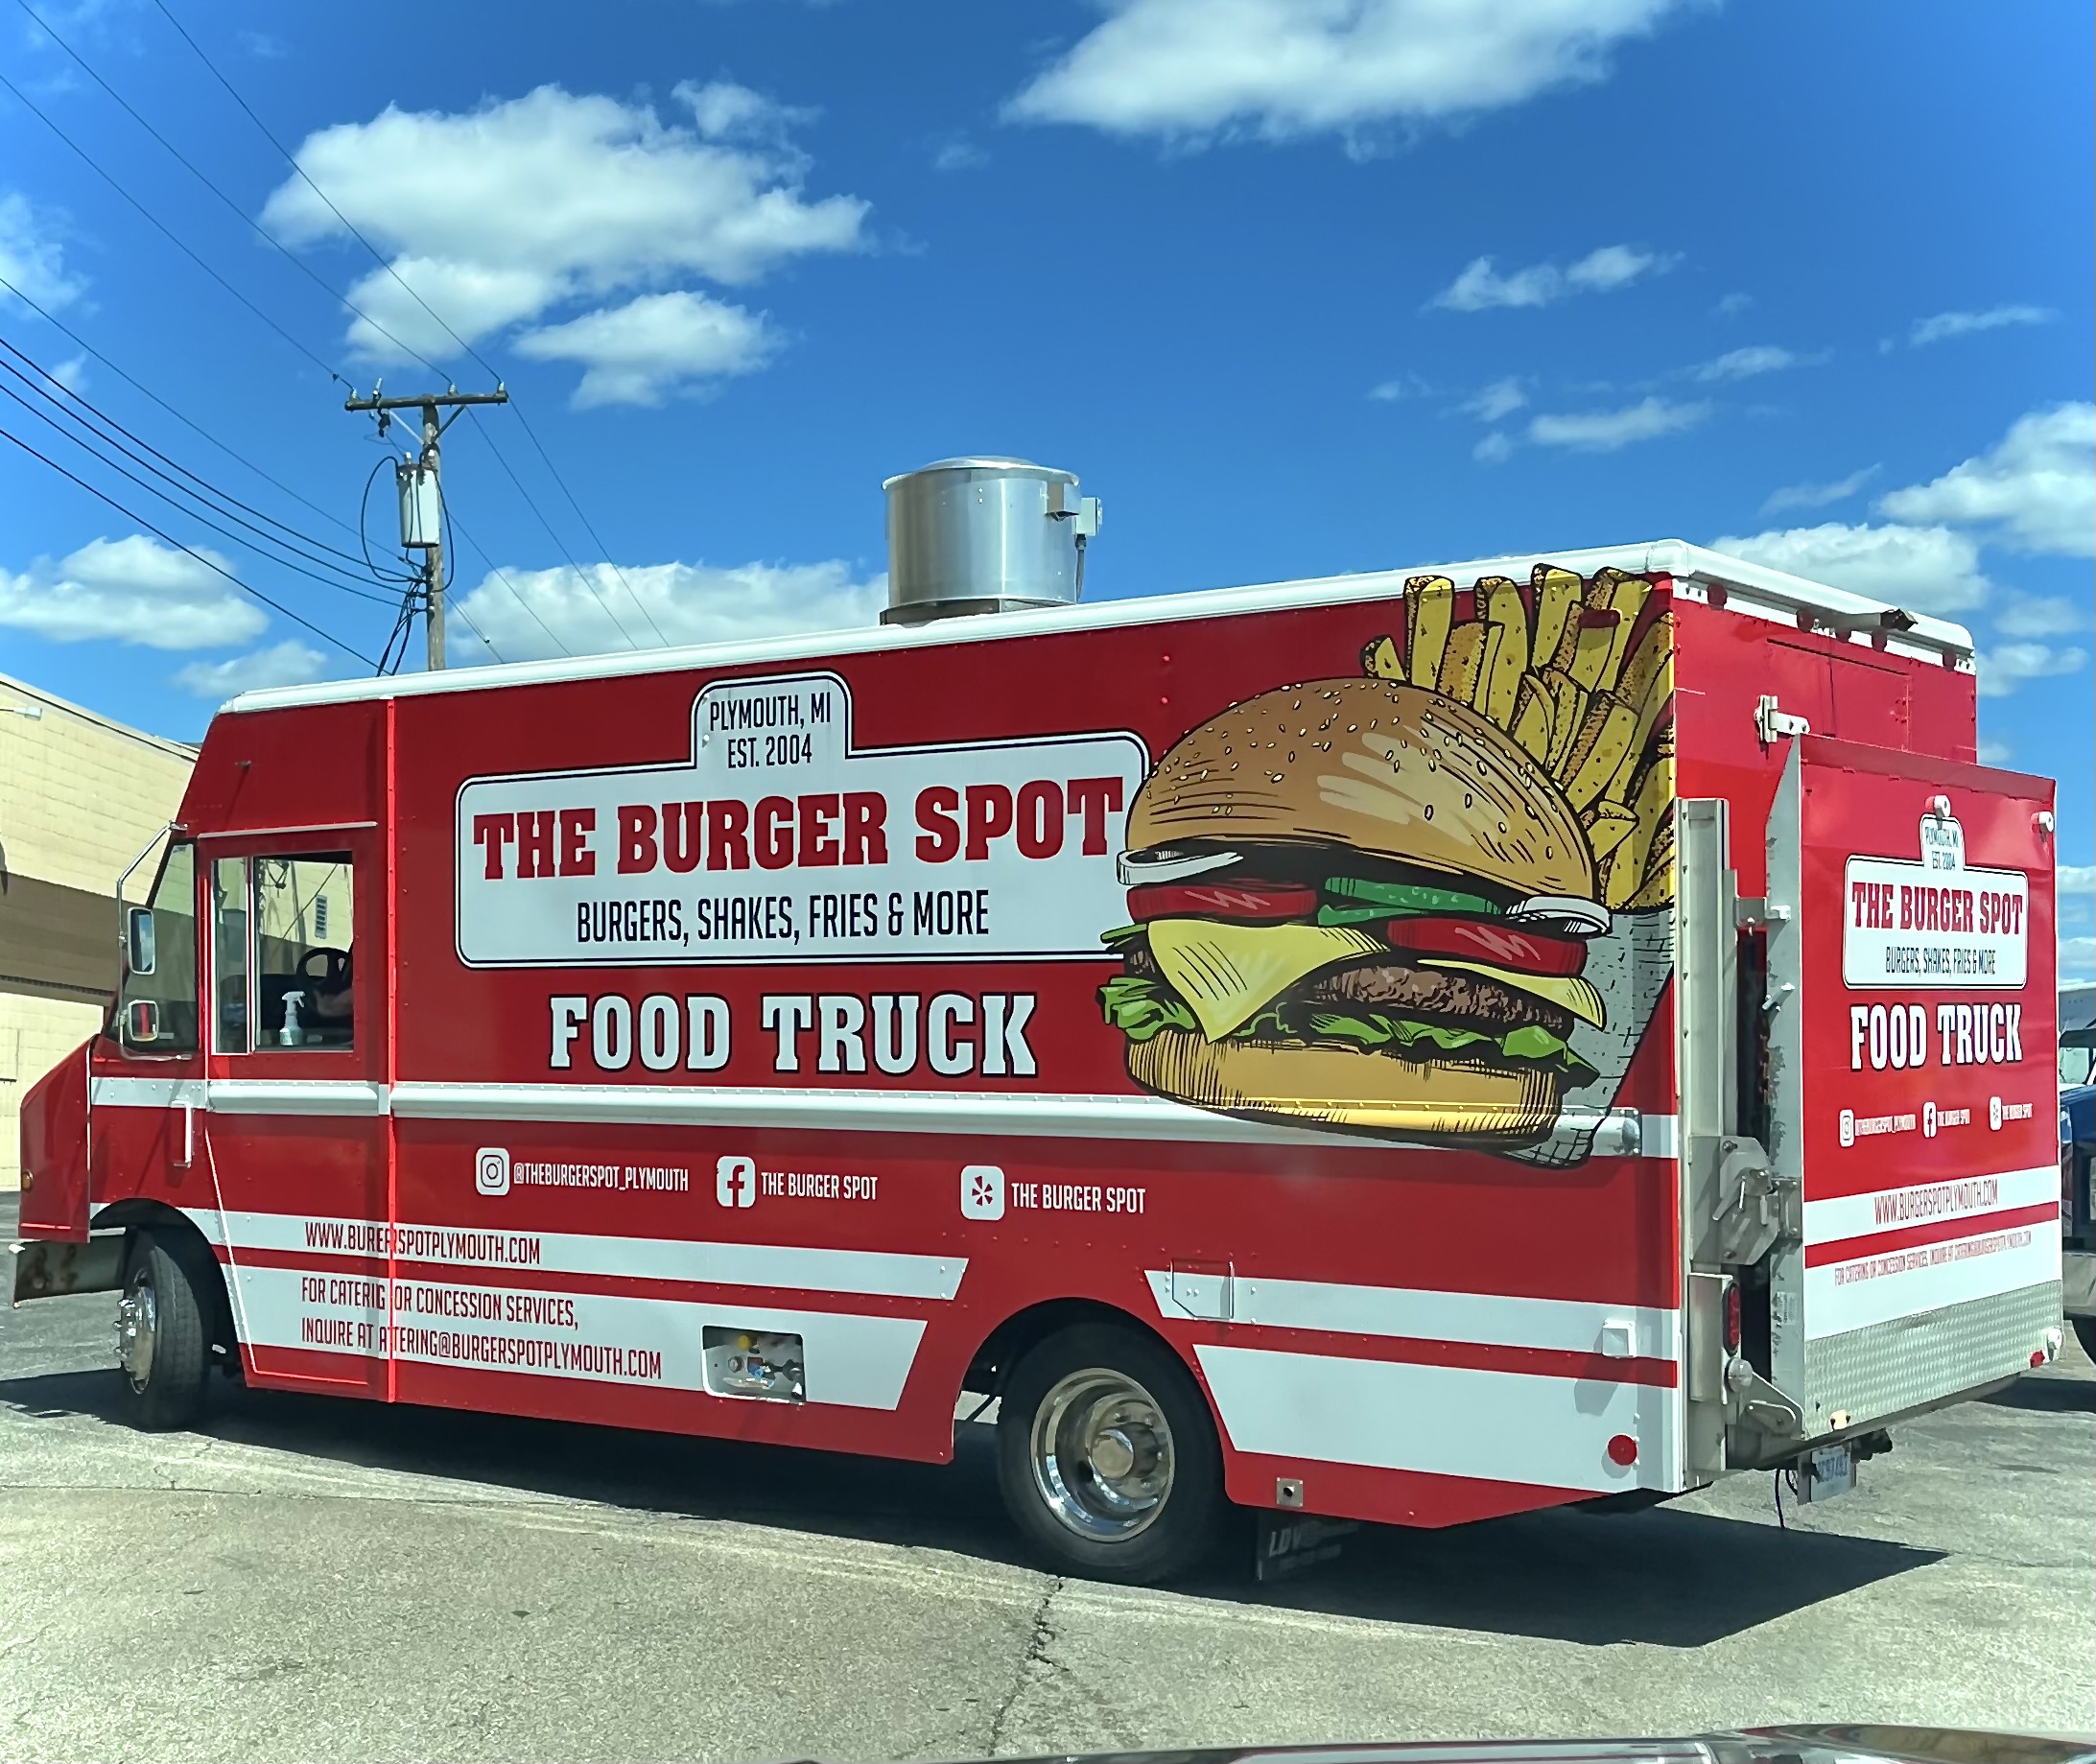 Corporate Food Truck Catering Services for Event, Birthday Party | The Burger Spot Food Truck